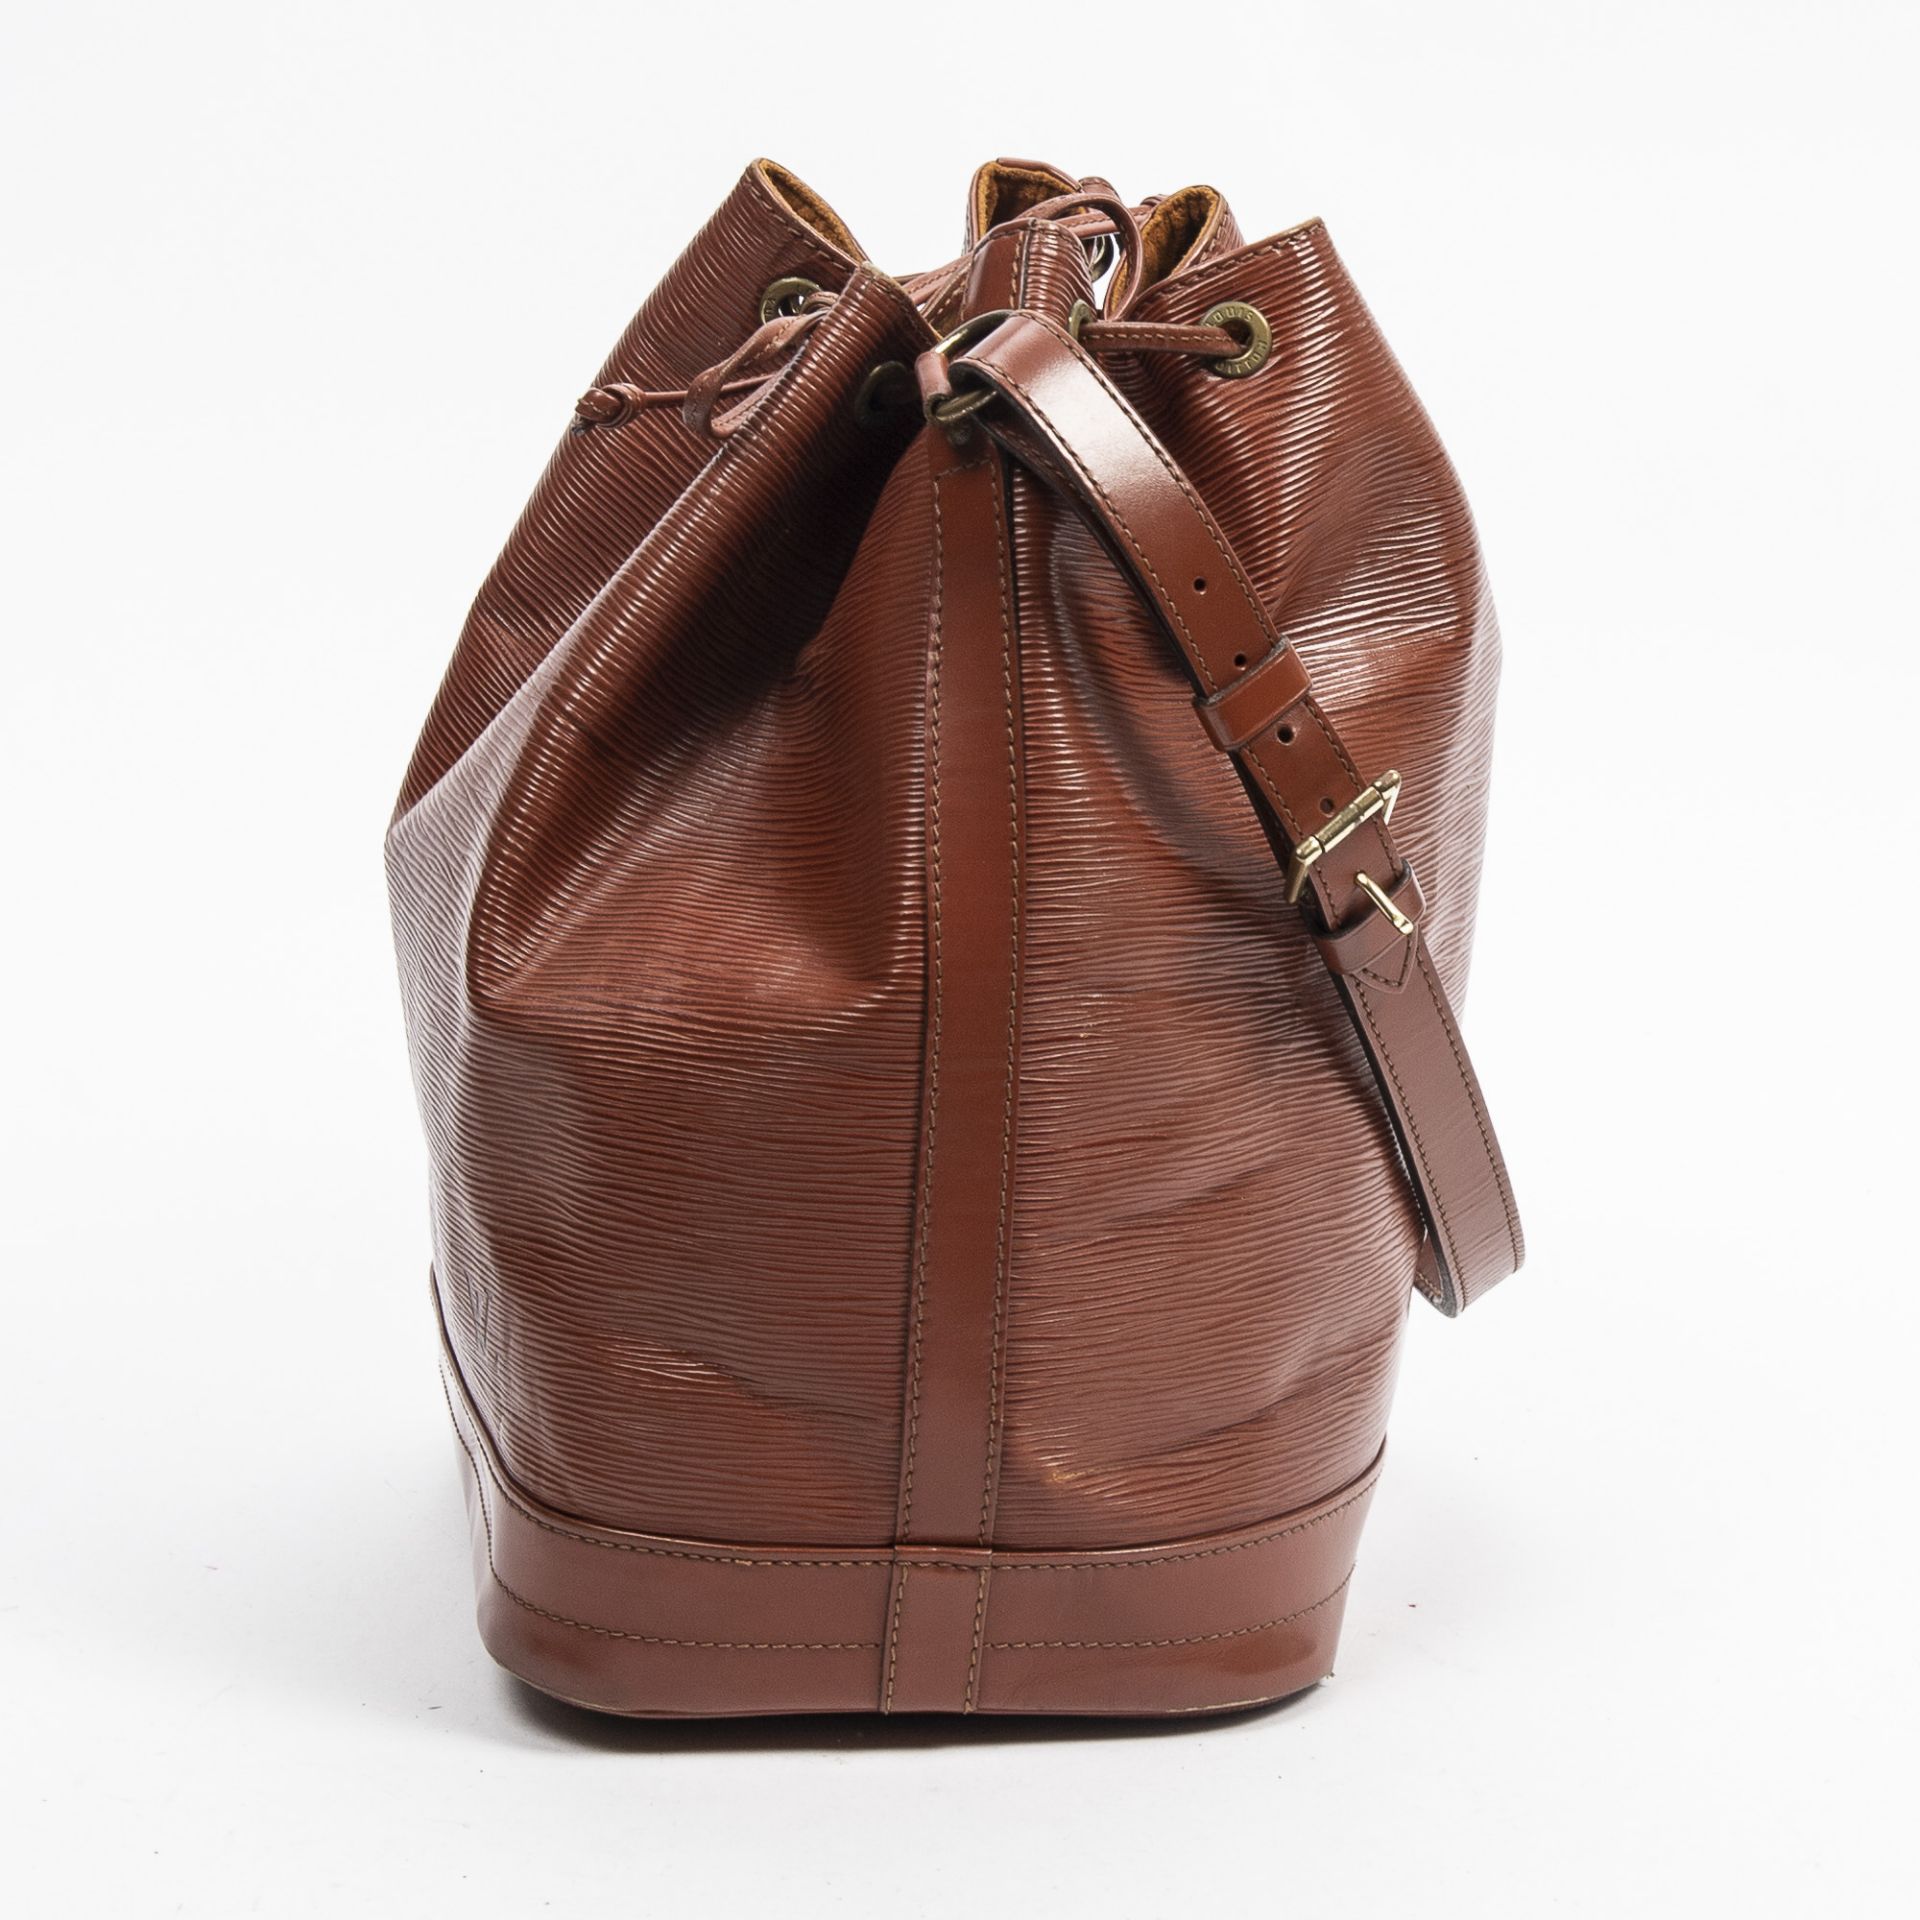 RRP £1,700.00 Lot To Contain 1 Louis Vuitton Calf Leather Noe Shoulder Bag In Tan - 27*34*16cm - - Image 3 of 3